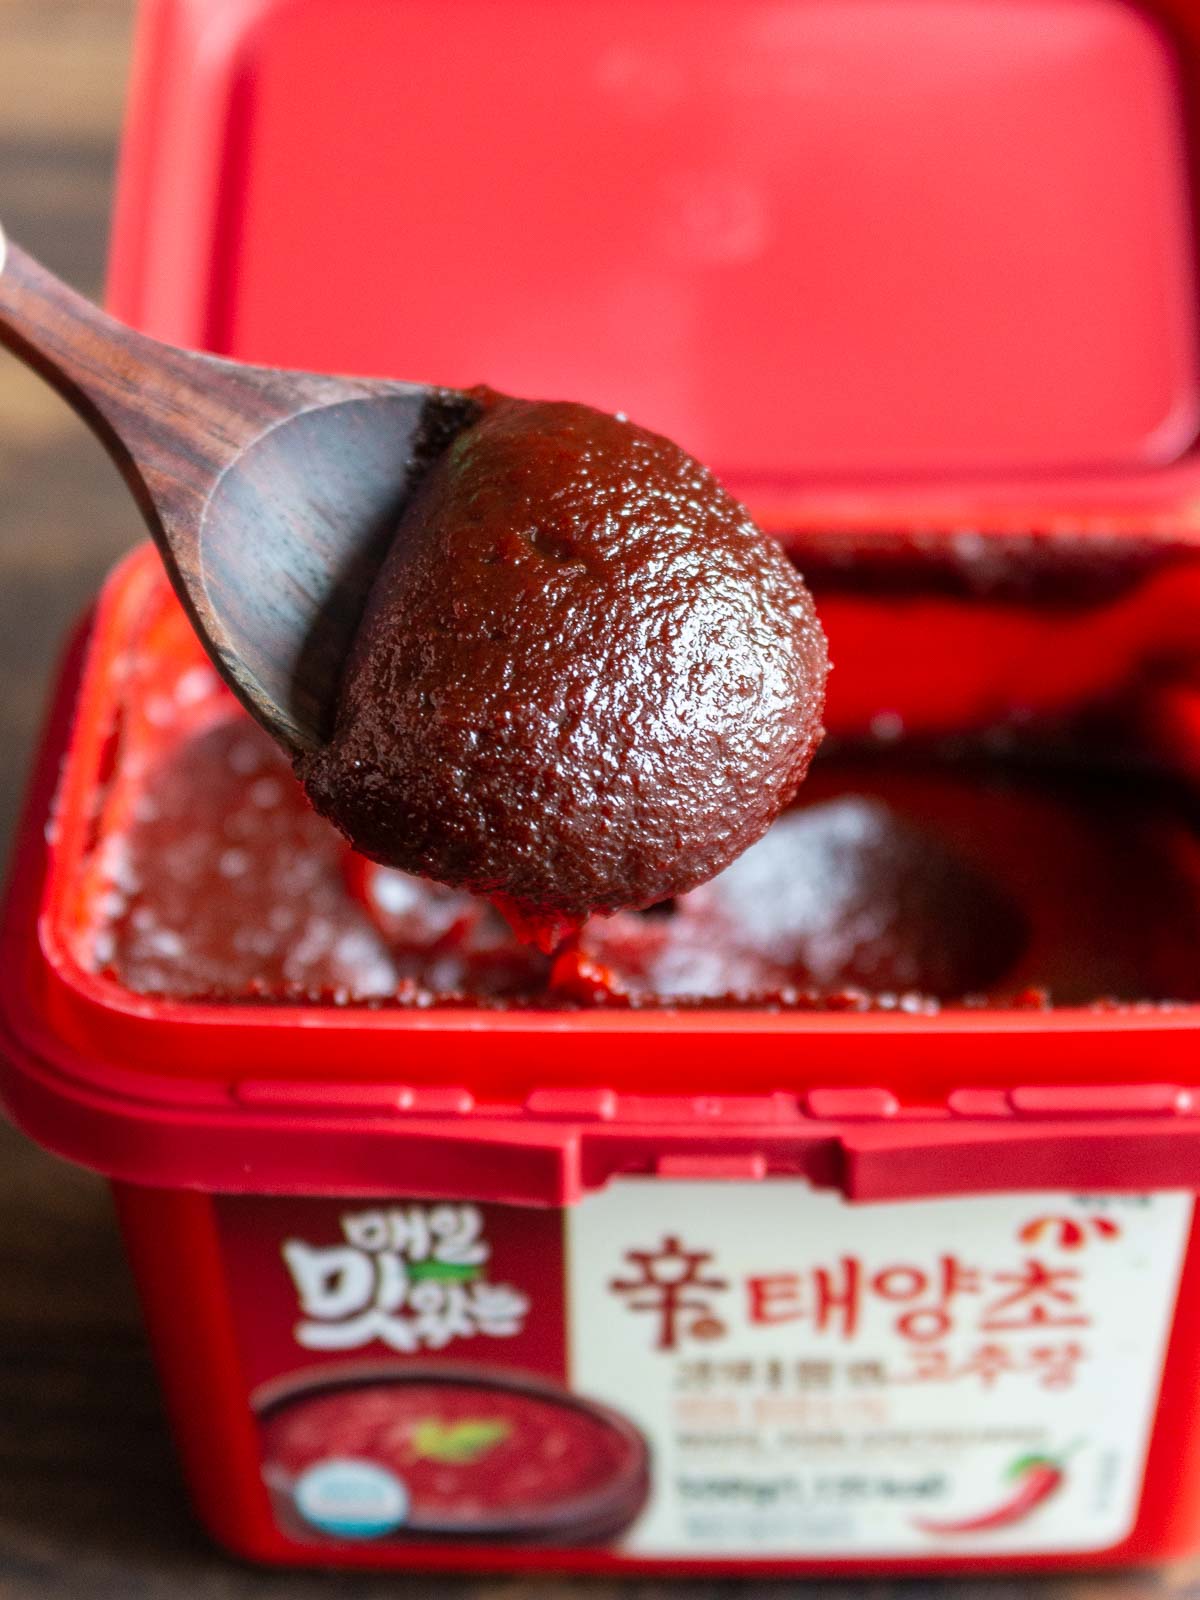 An opened container of gochujang paste with a spoonful taken out.